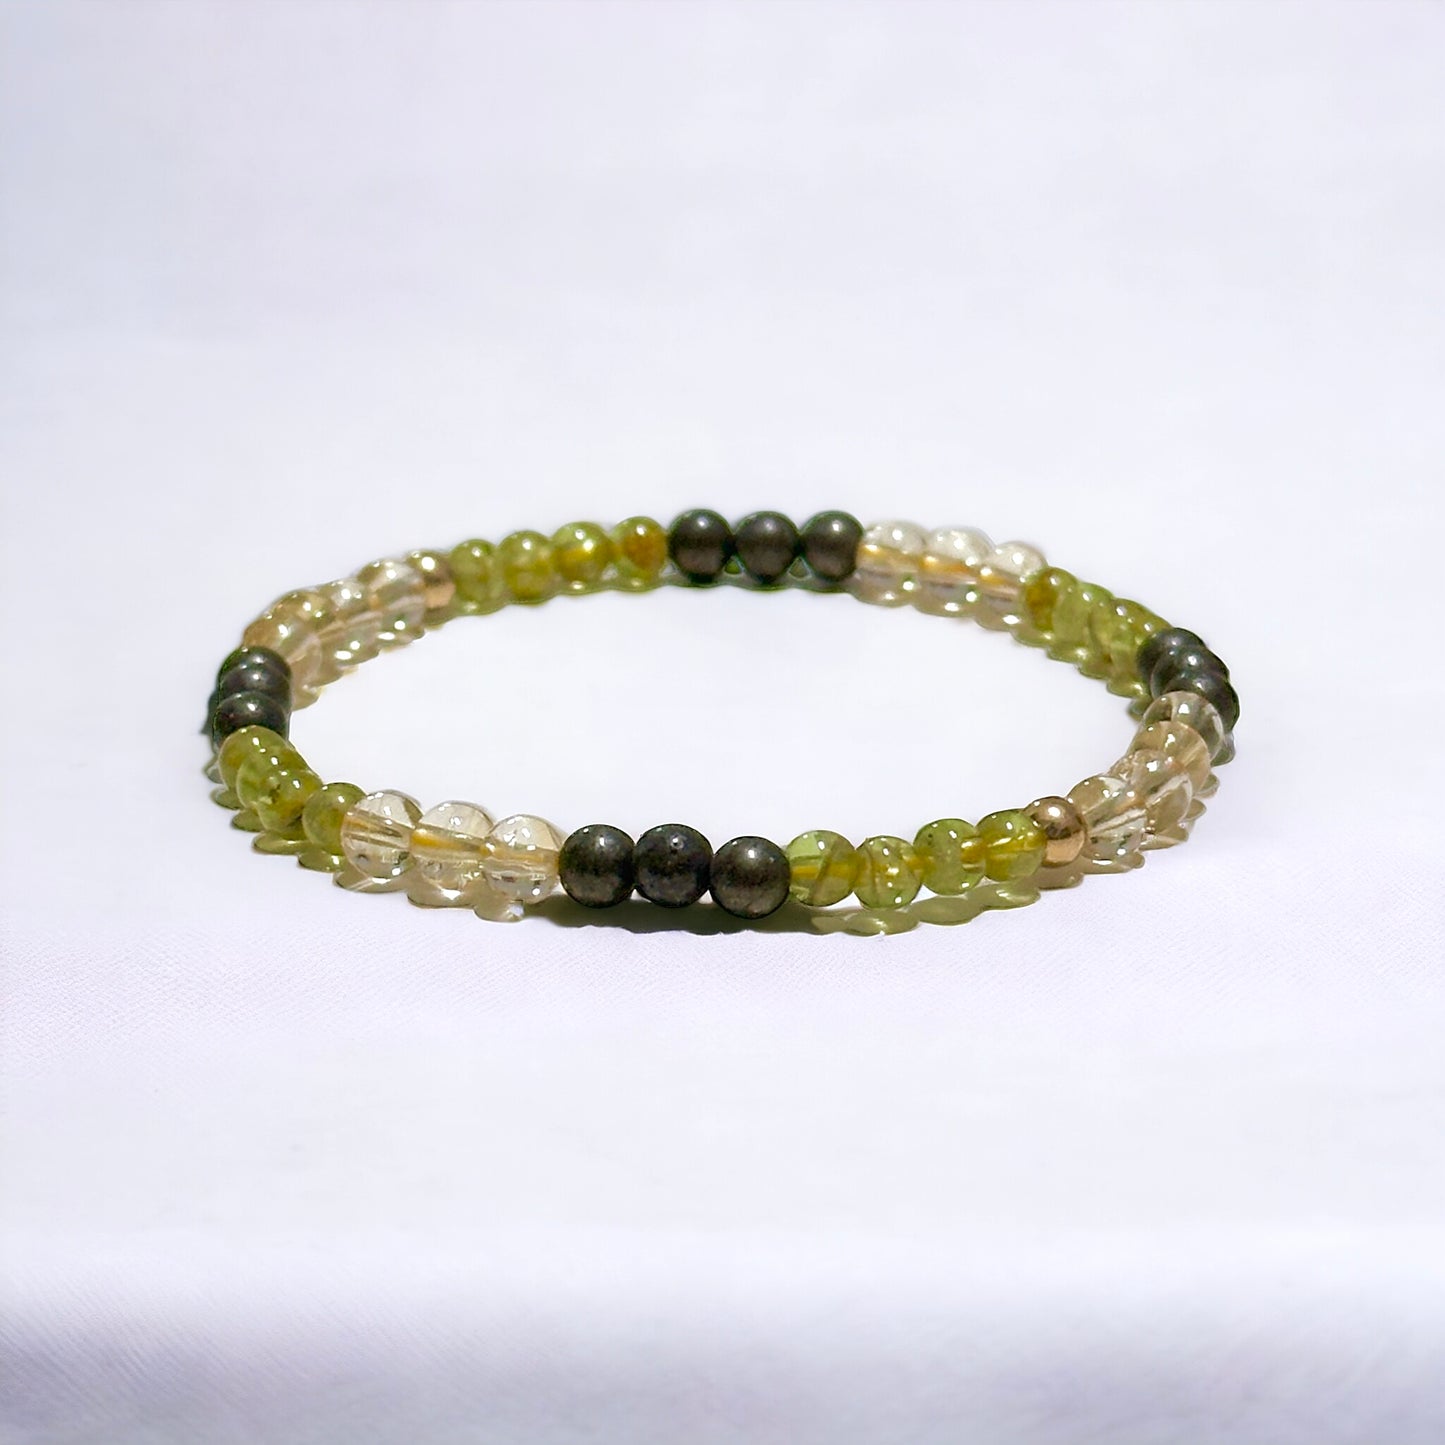 Wealth Activator Bracelet (4mm Citrine, Peridot, Pyrite with 14k gold filled beads)